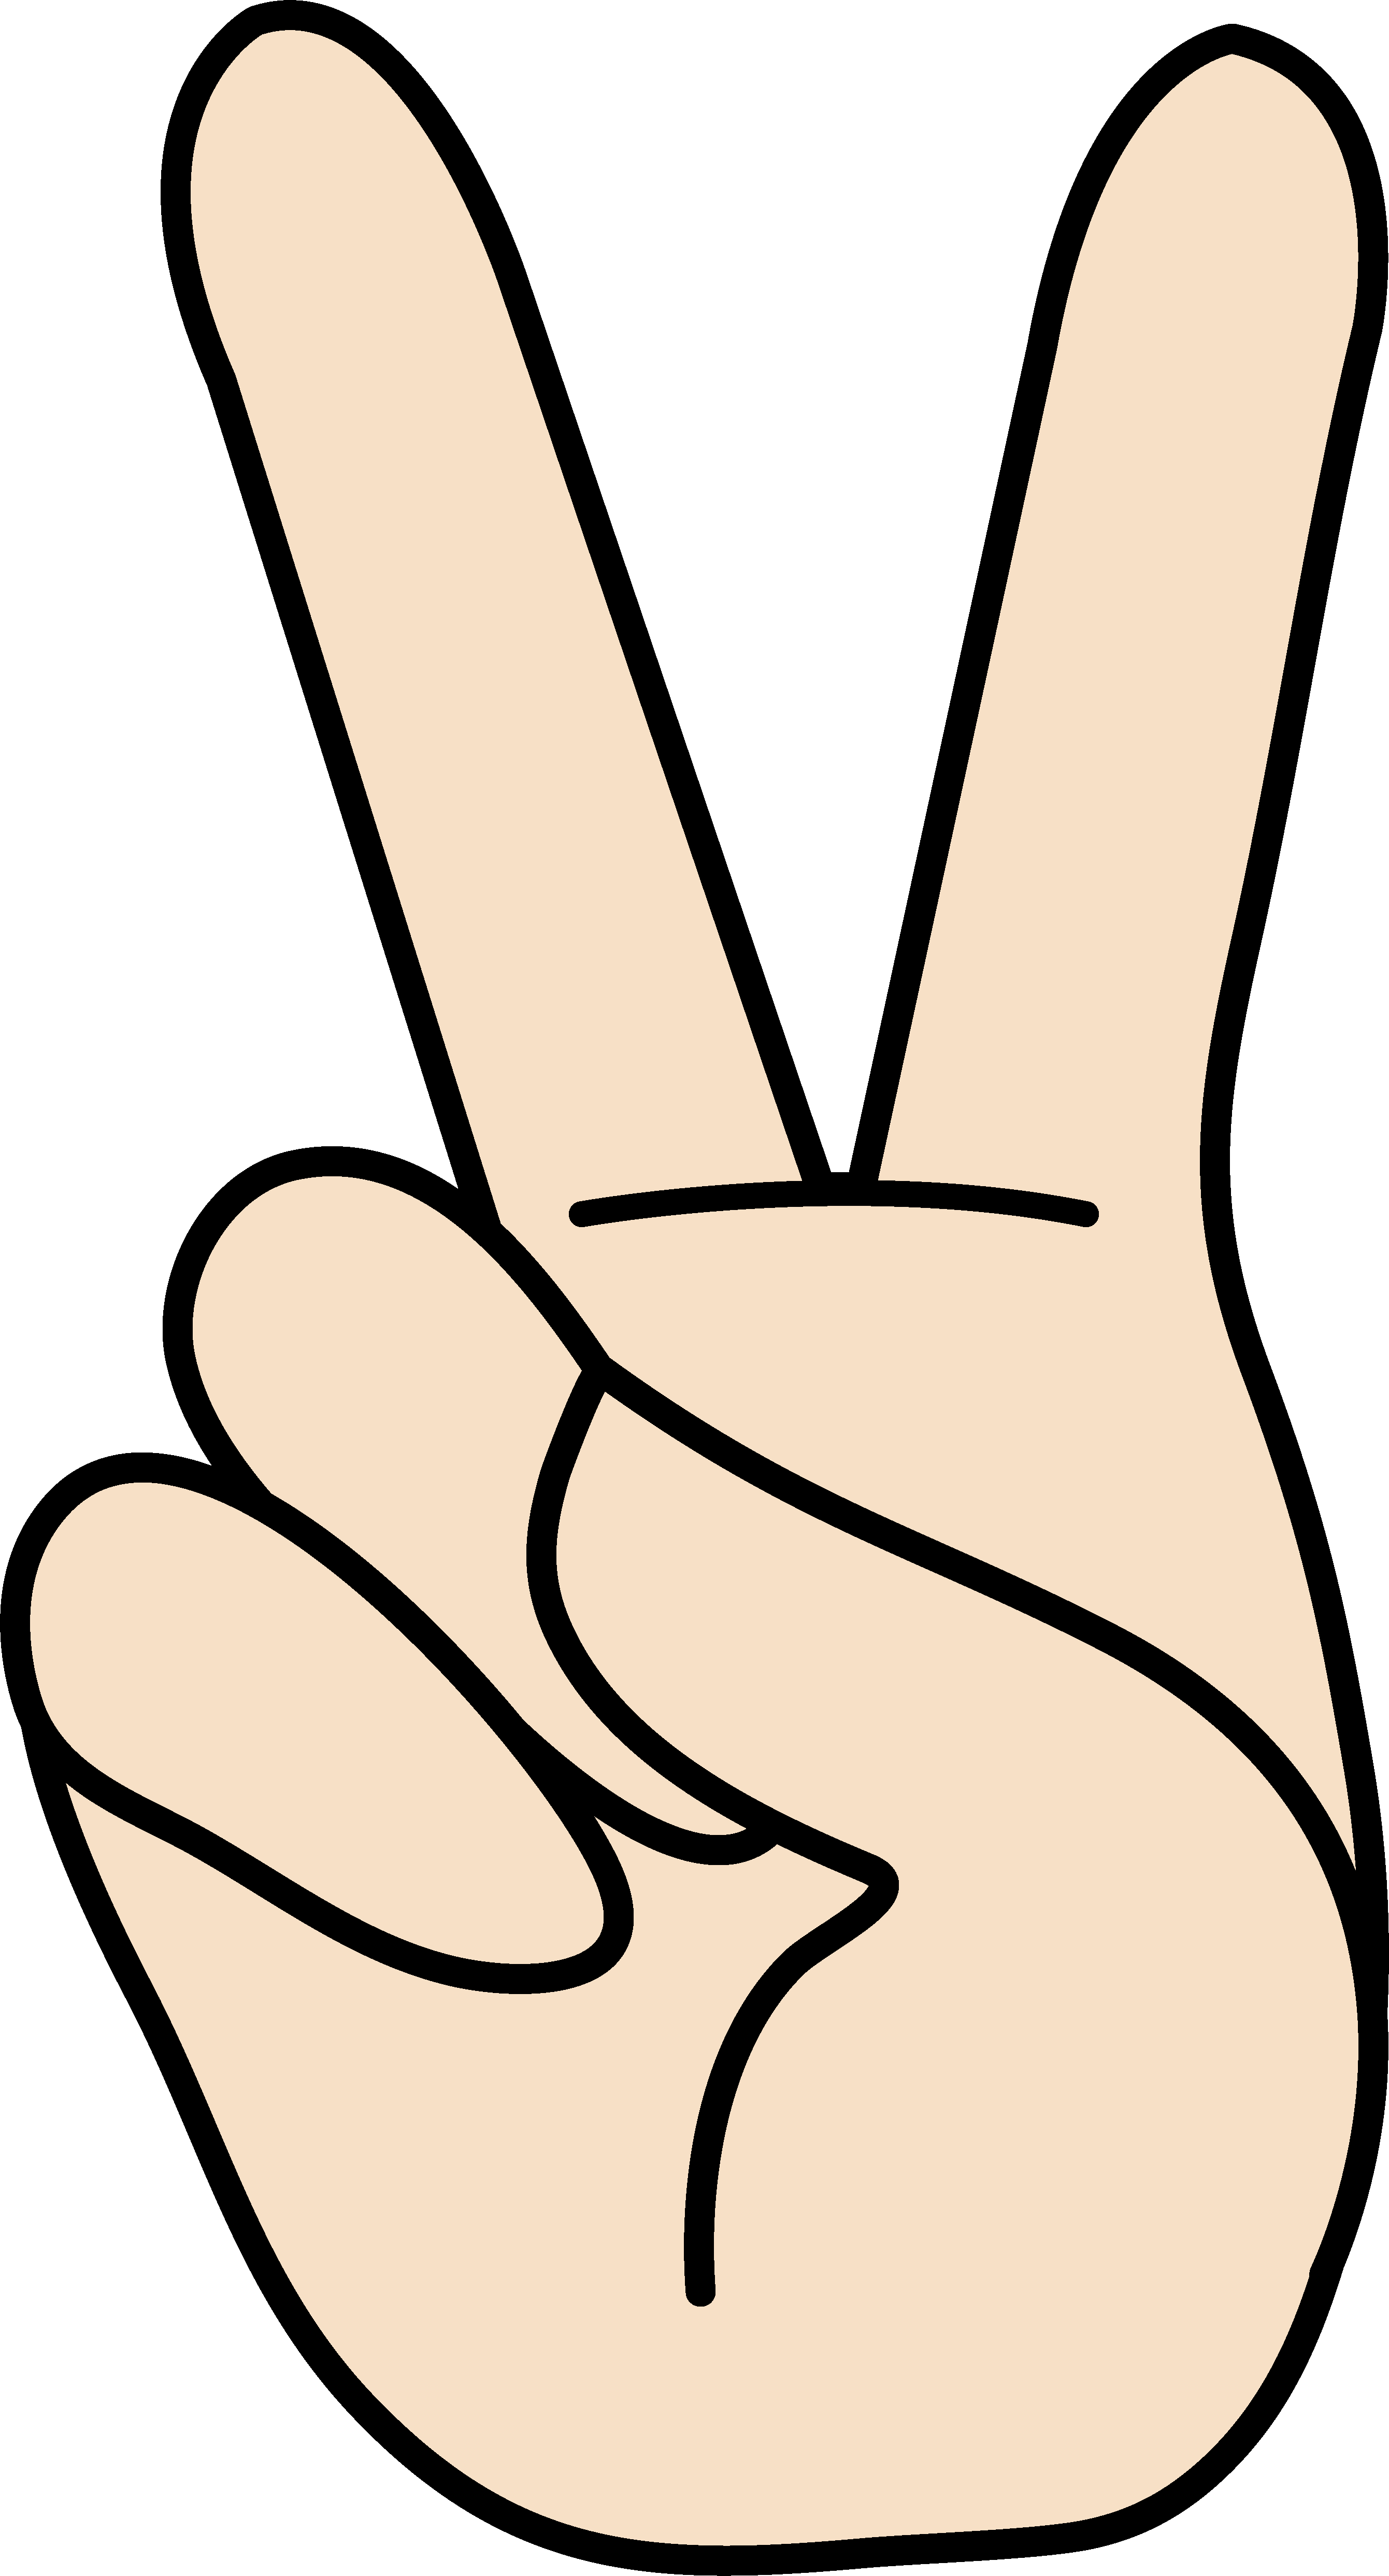 Hand Peace Sign Symbol | Clipart Panda - Free Clipart Images